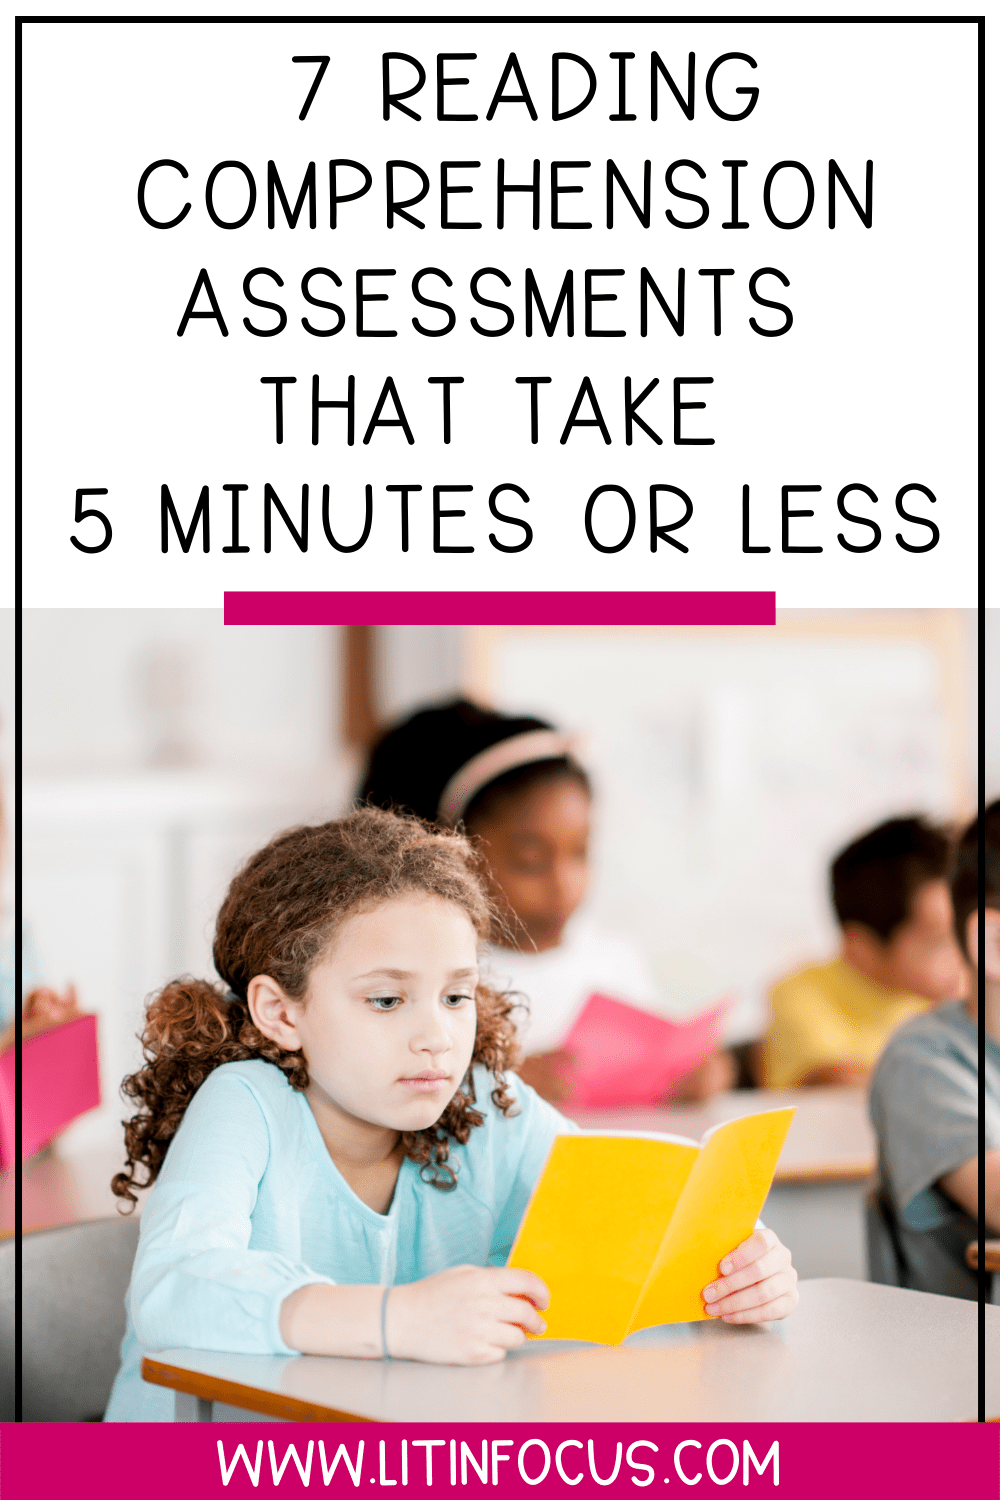 7 Reading Comprehension Assessment Activities and Strategies for Teachers